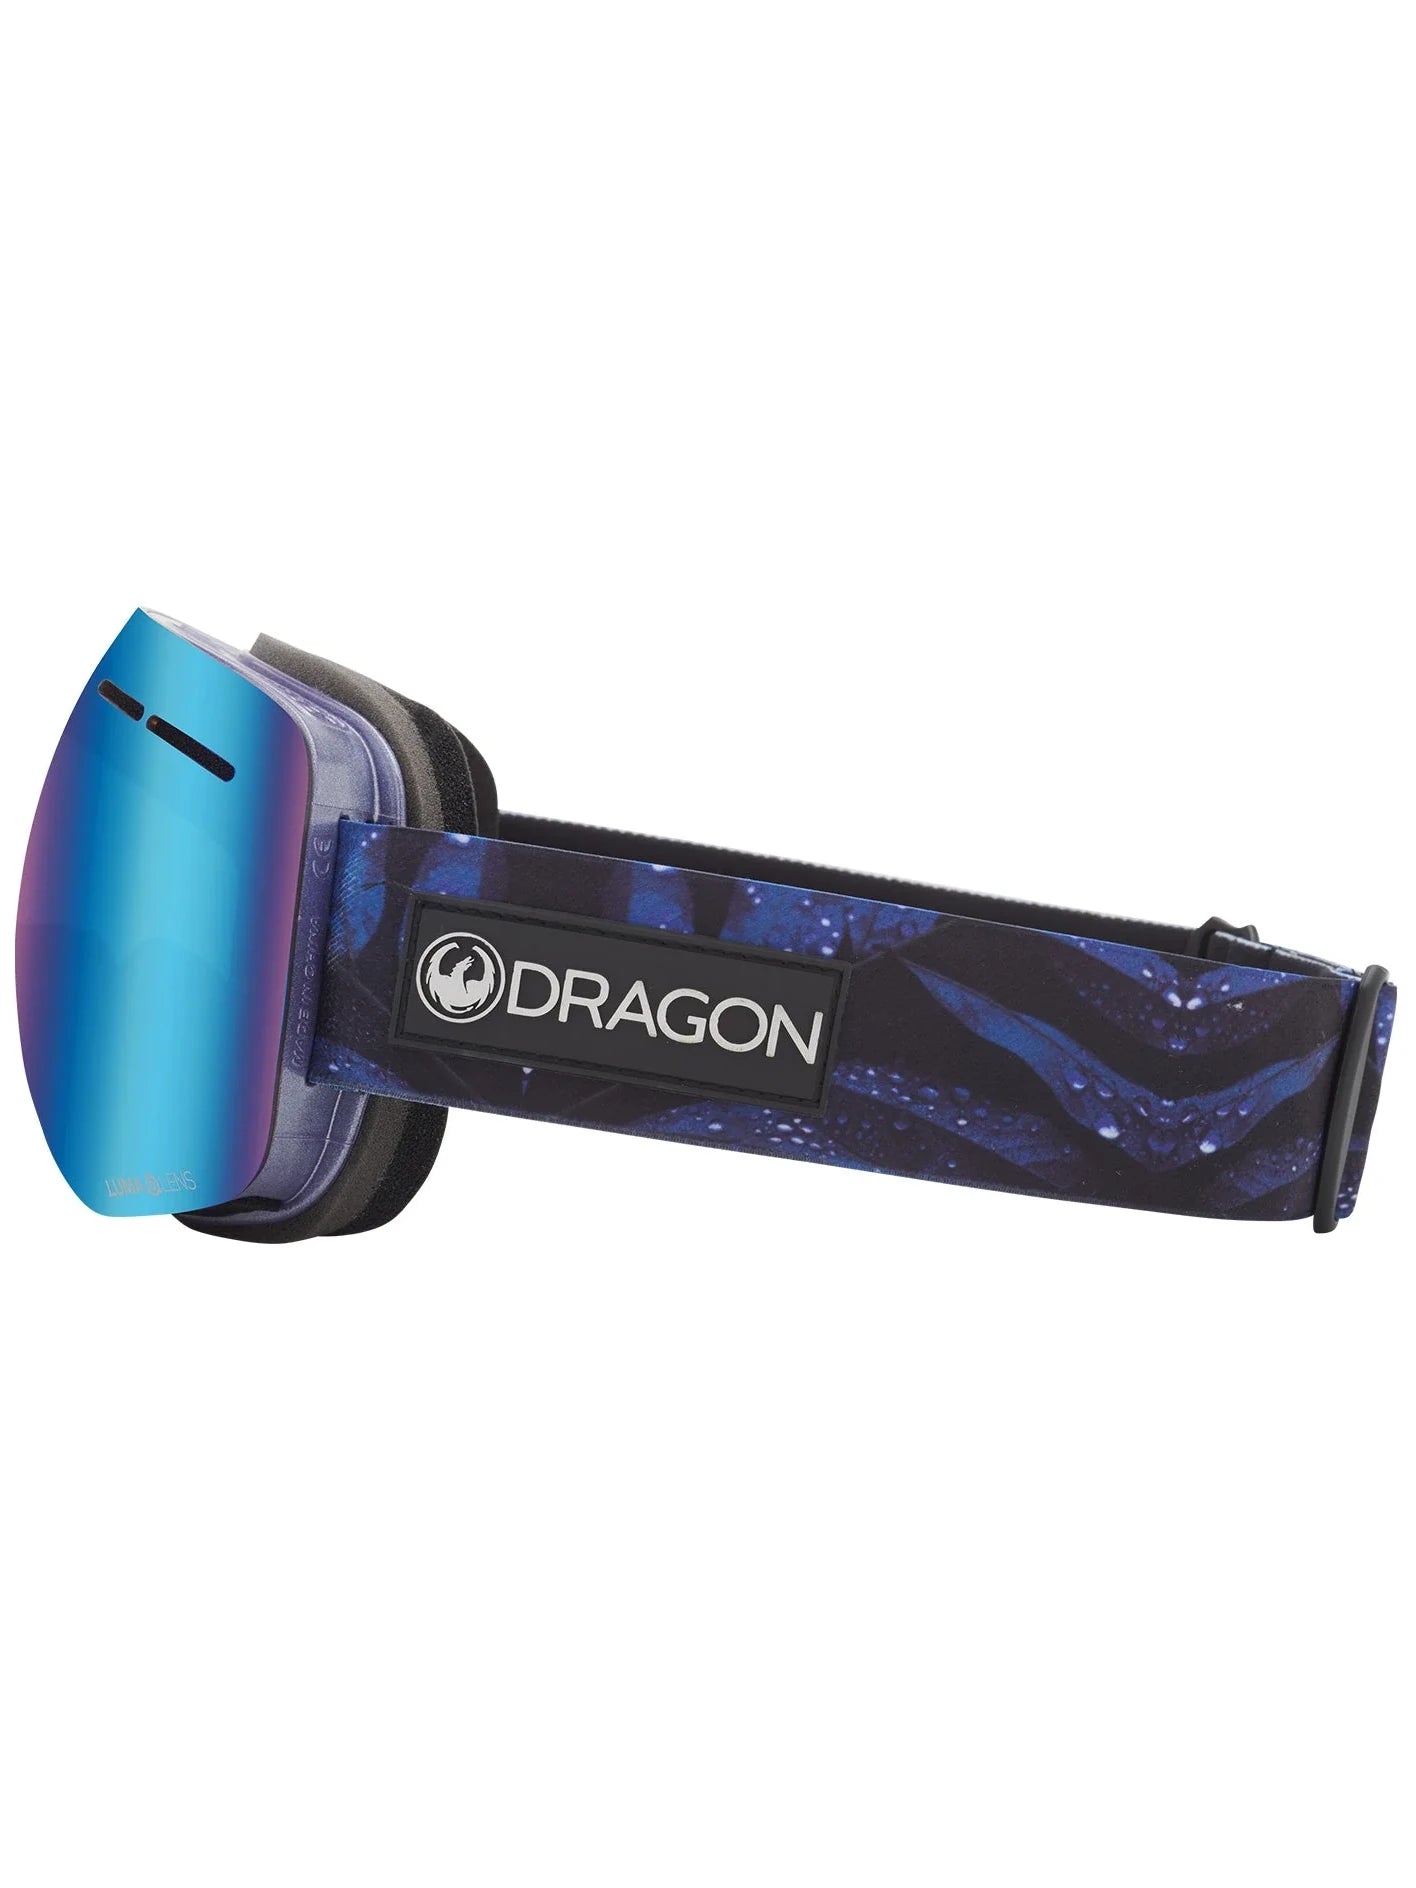 Dragon X1s - Shimmer with Lumalens Blue Ionized & Lumalens Violet Lens